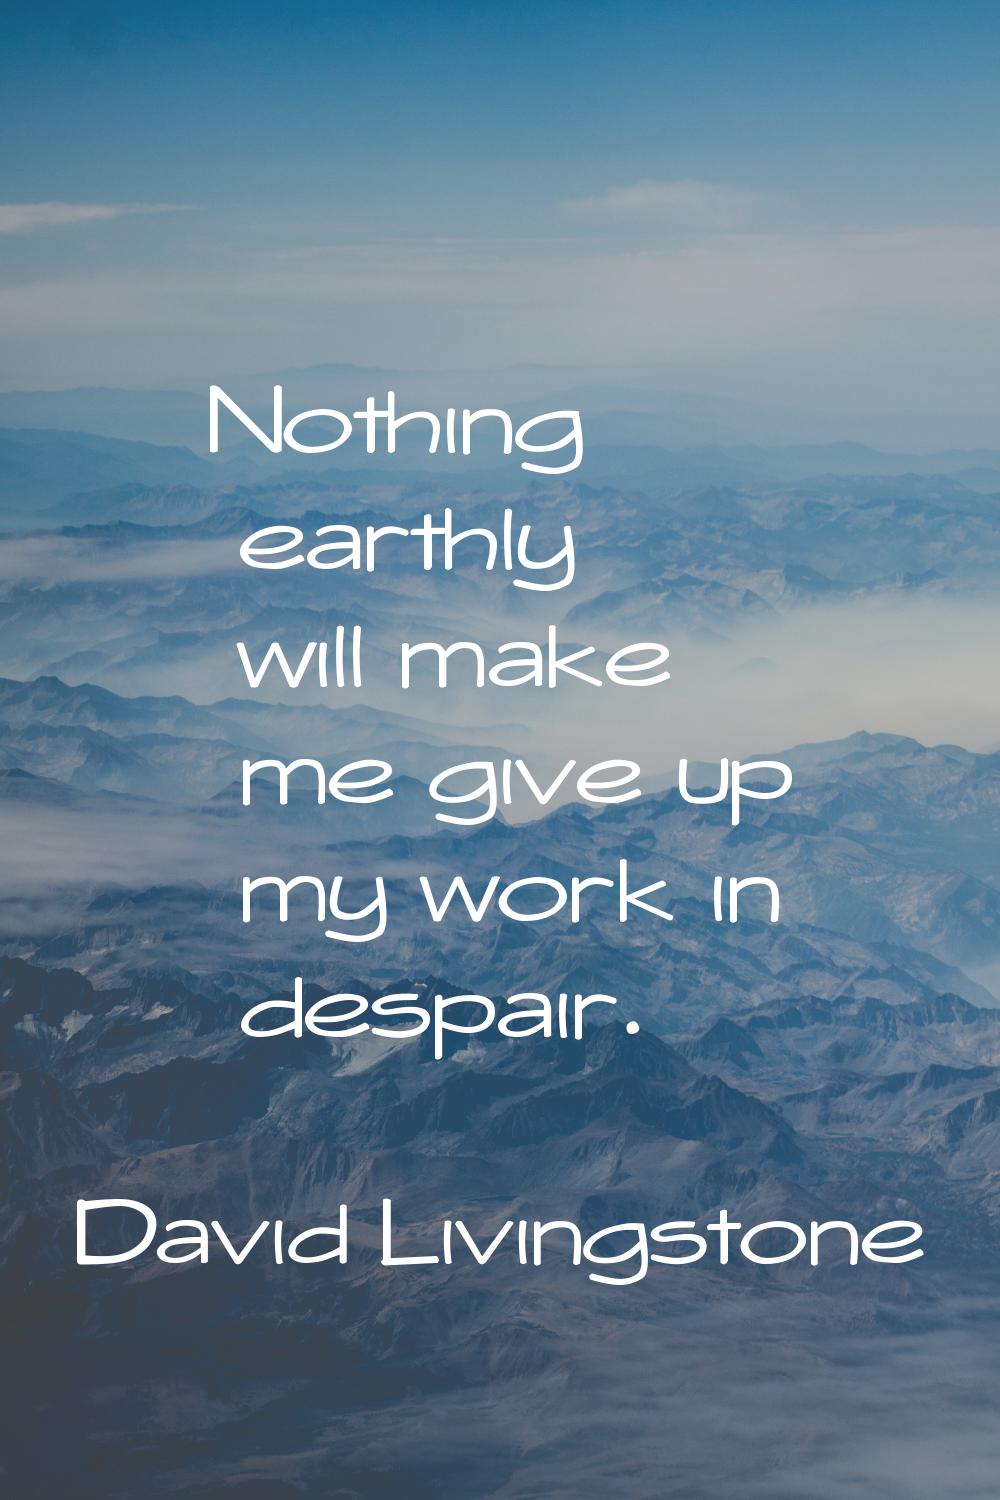 Nothing earthly will make me give up my work in despair.